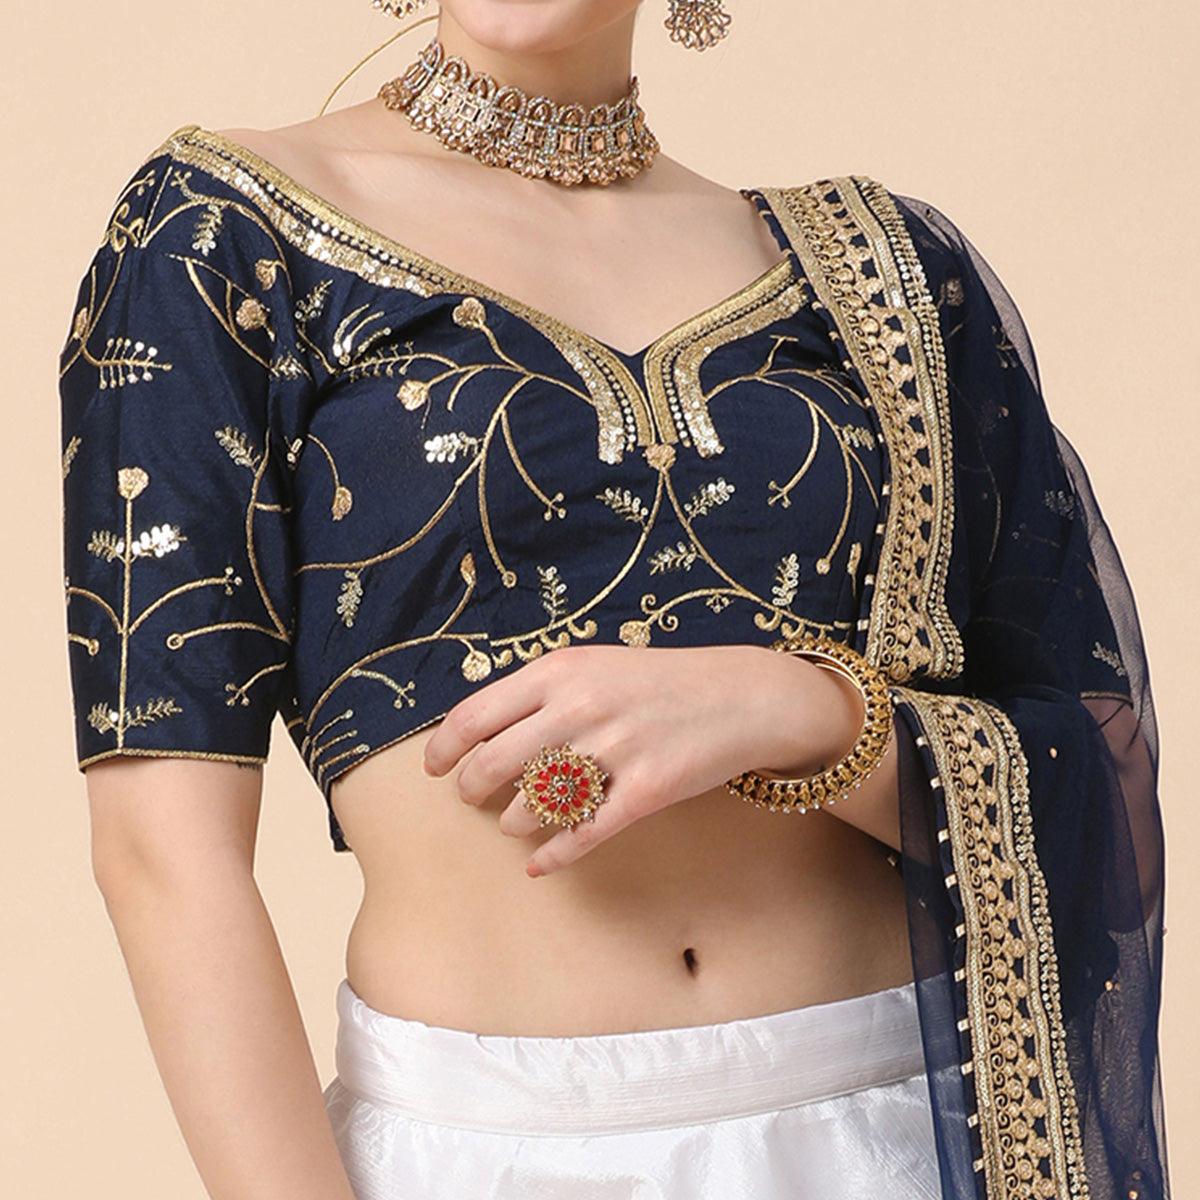 Navy Blue-White Party Wear Sequence Embroidered Satin Lehenga Choli - Peachmode